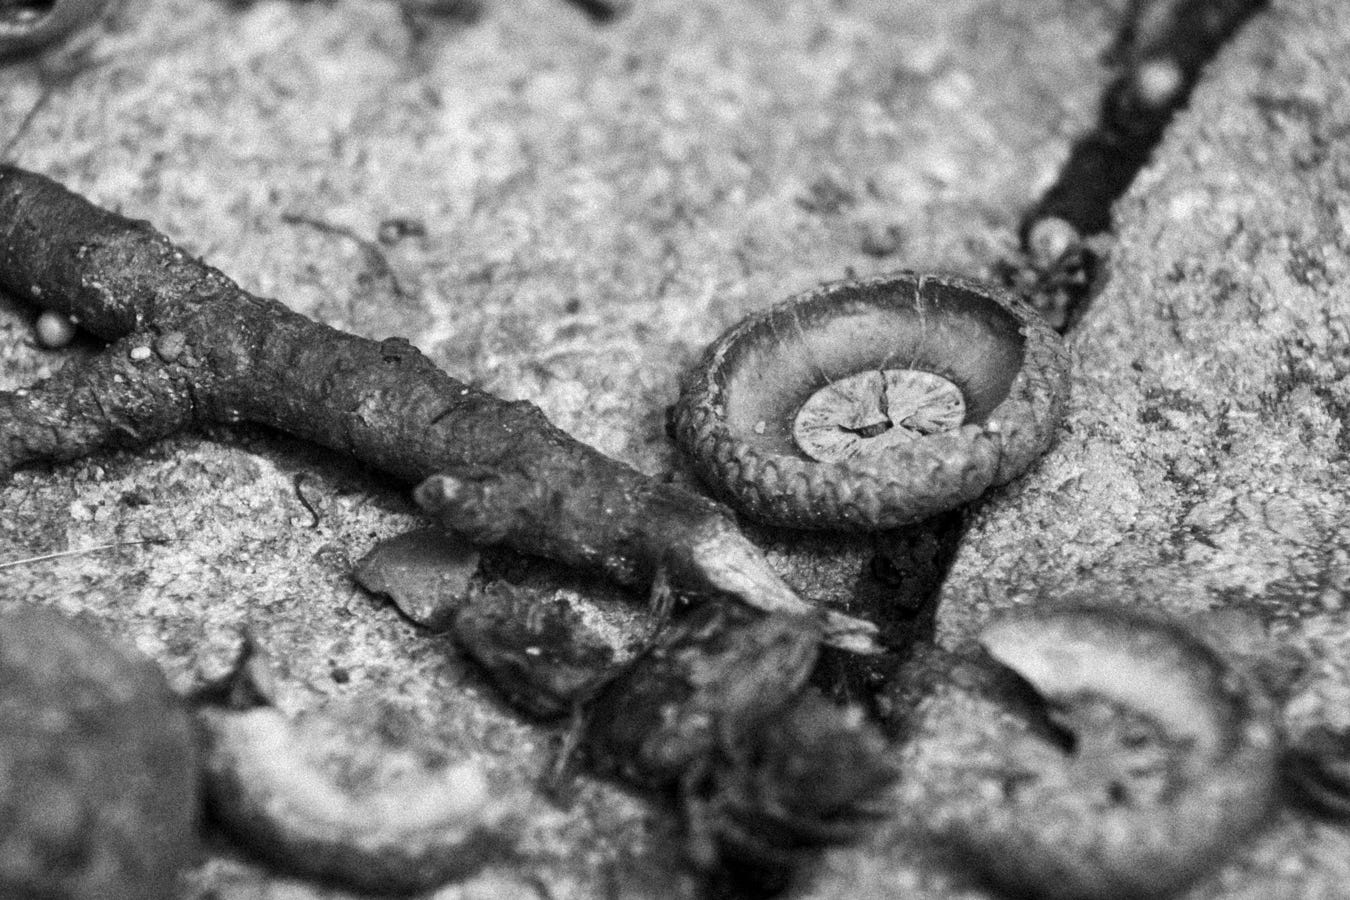 black and white image of concrete, a small stick, the top of an acorn, other assorted detritus.